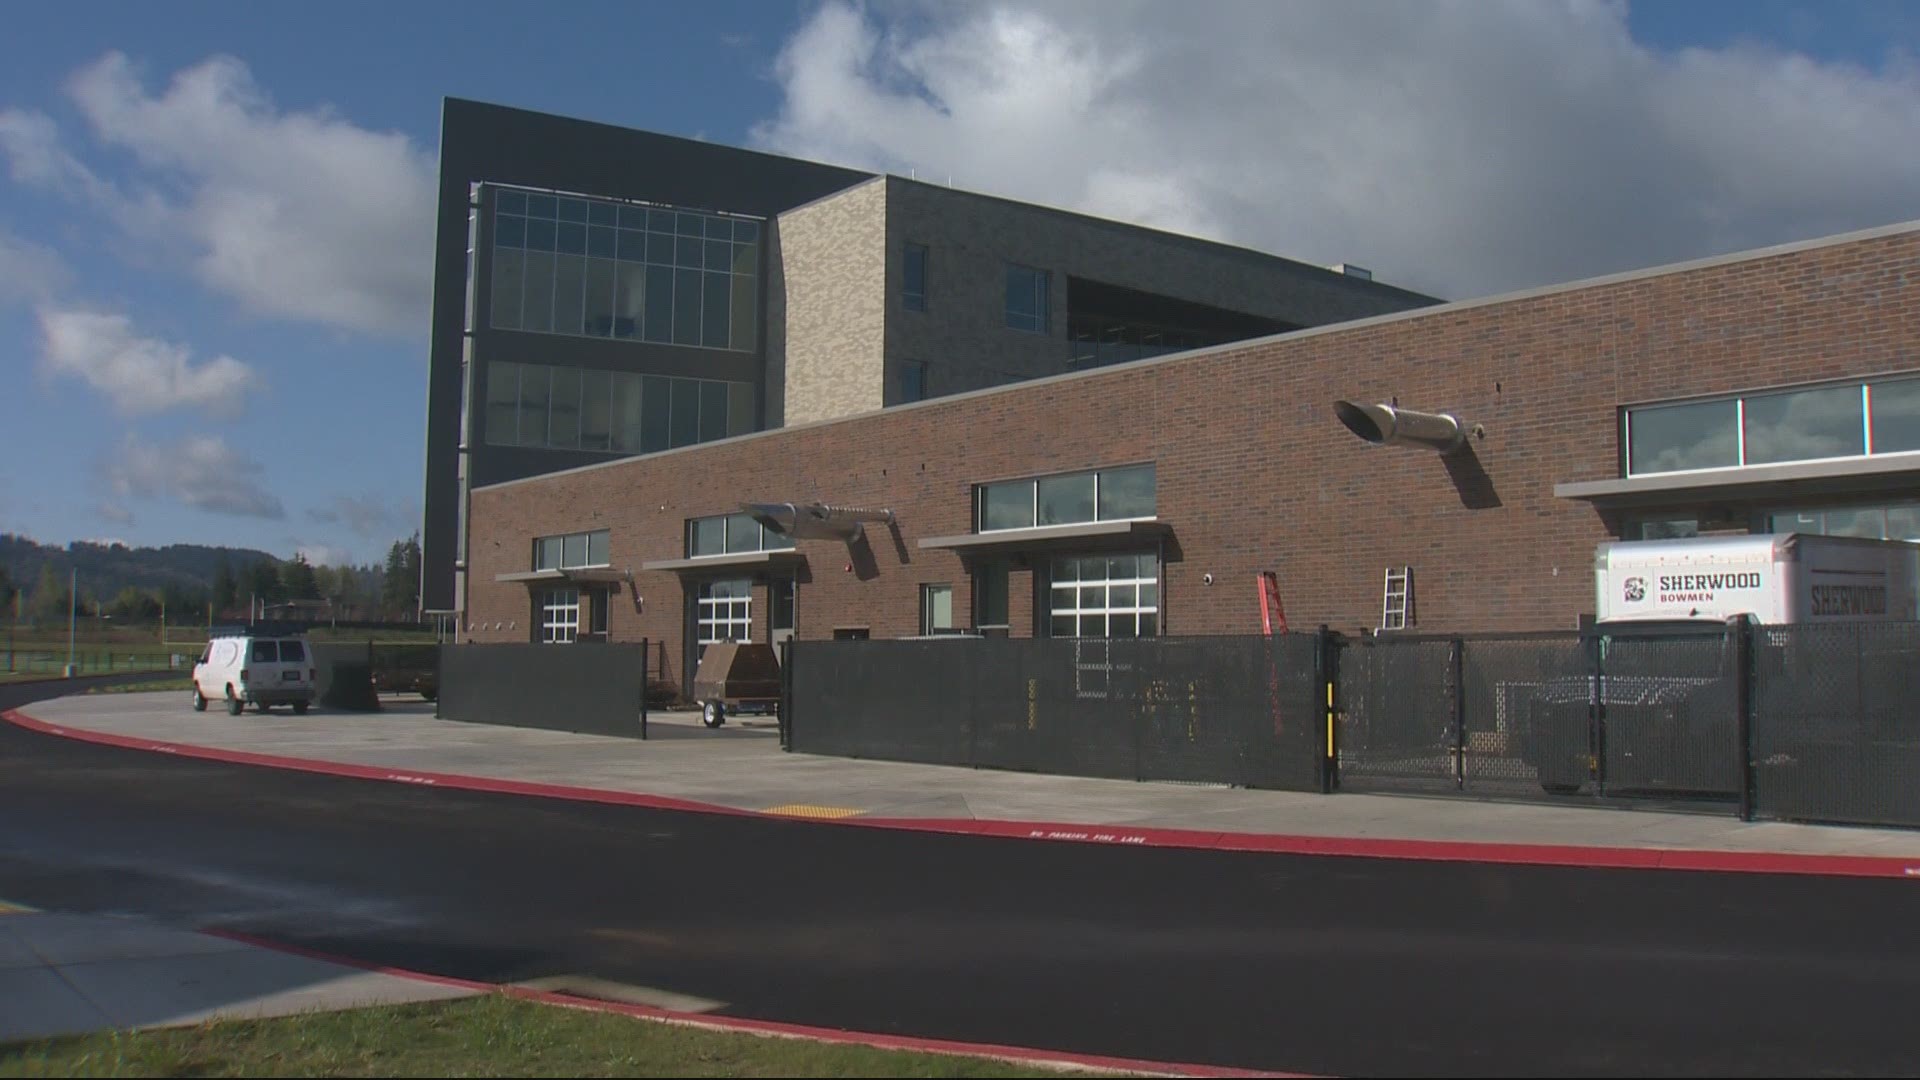 Teachers are trying to use the school's new construction as an opportunity to get more students interested in careers they may not have thought about.